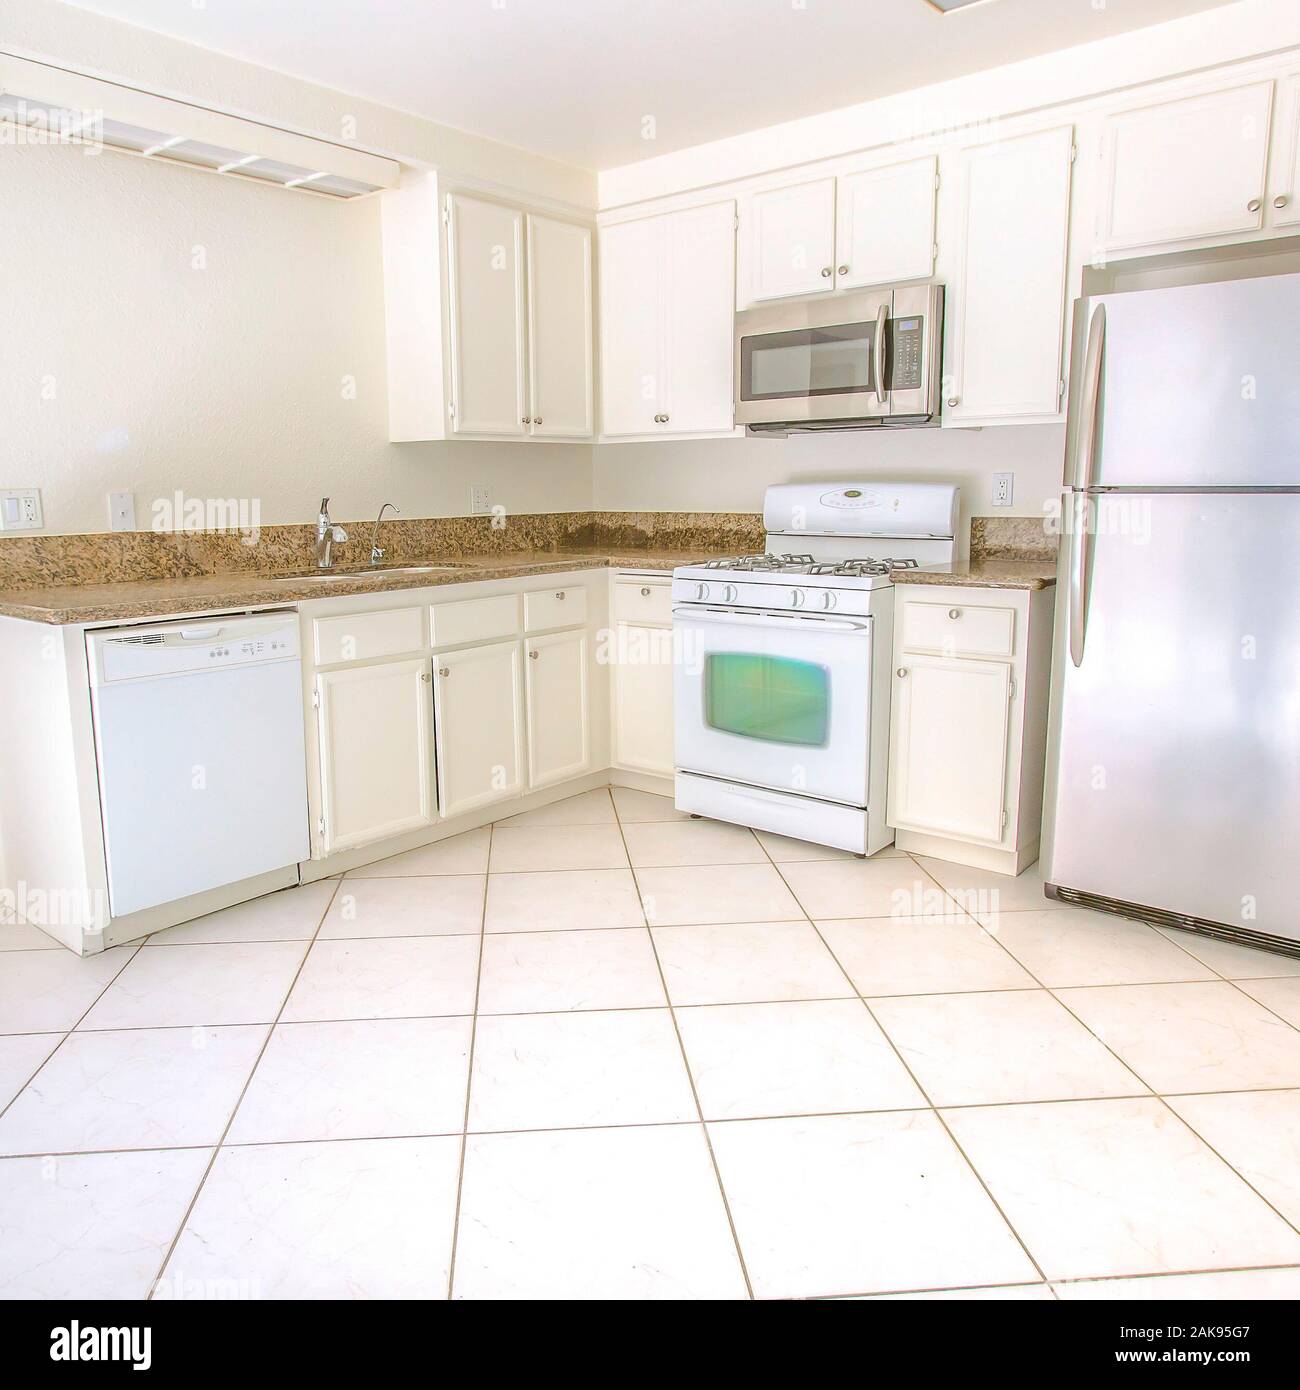 Square White Bright Kitchen And Countertops Clean Inside Stock